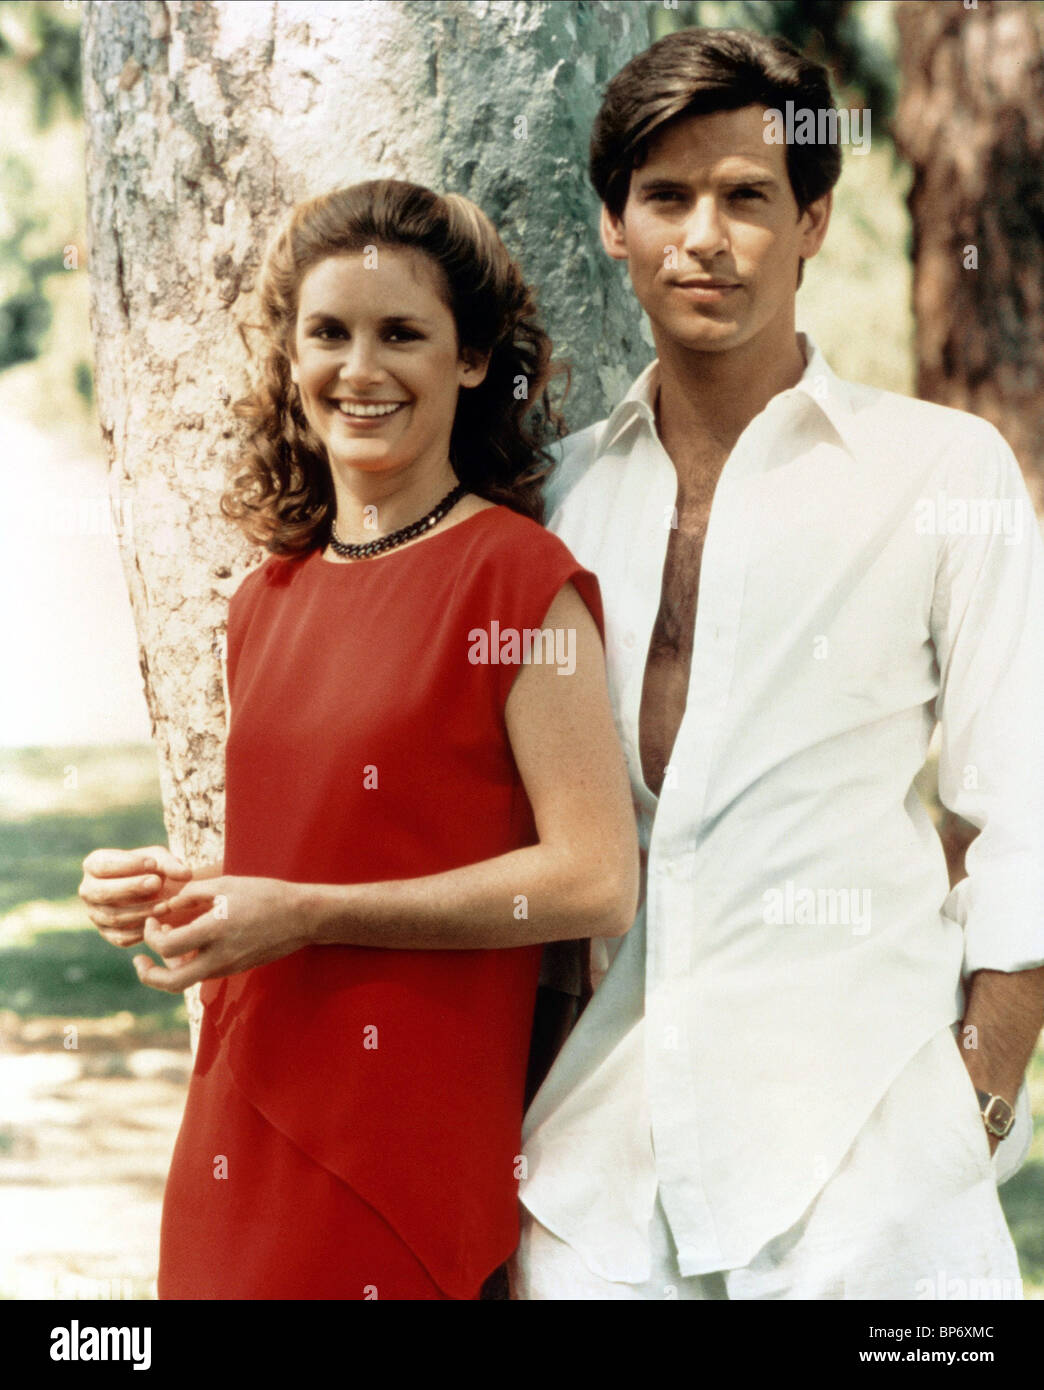 Is Stephanie Zimbalist Married? What Is She Up To Now?